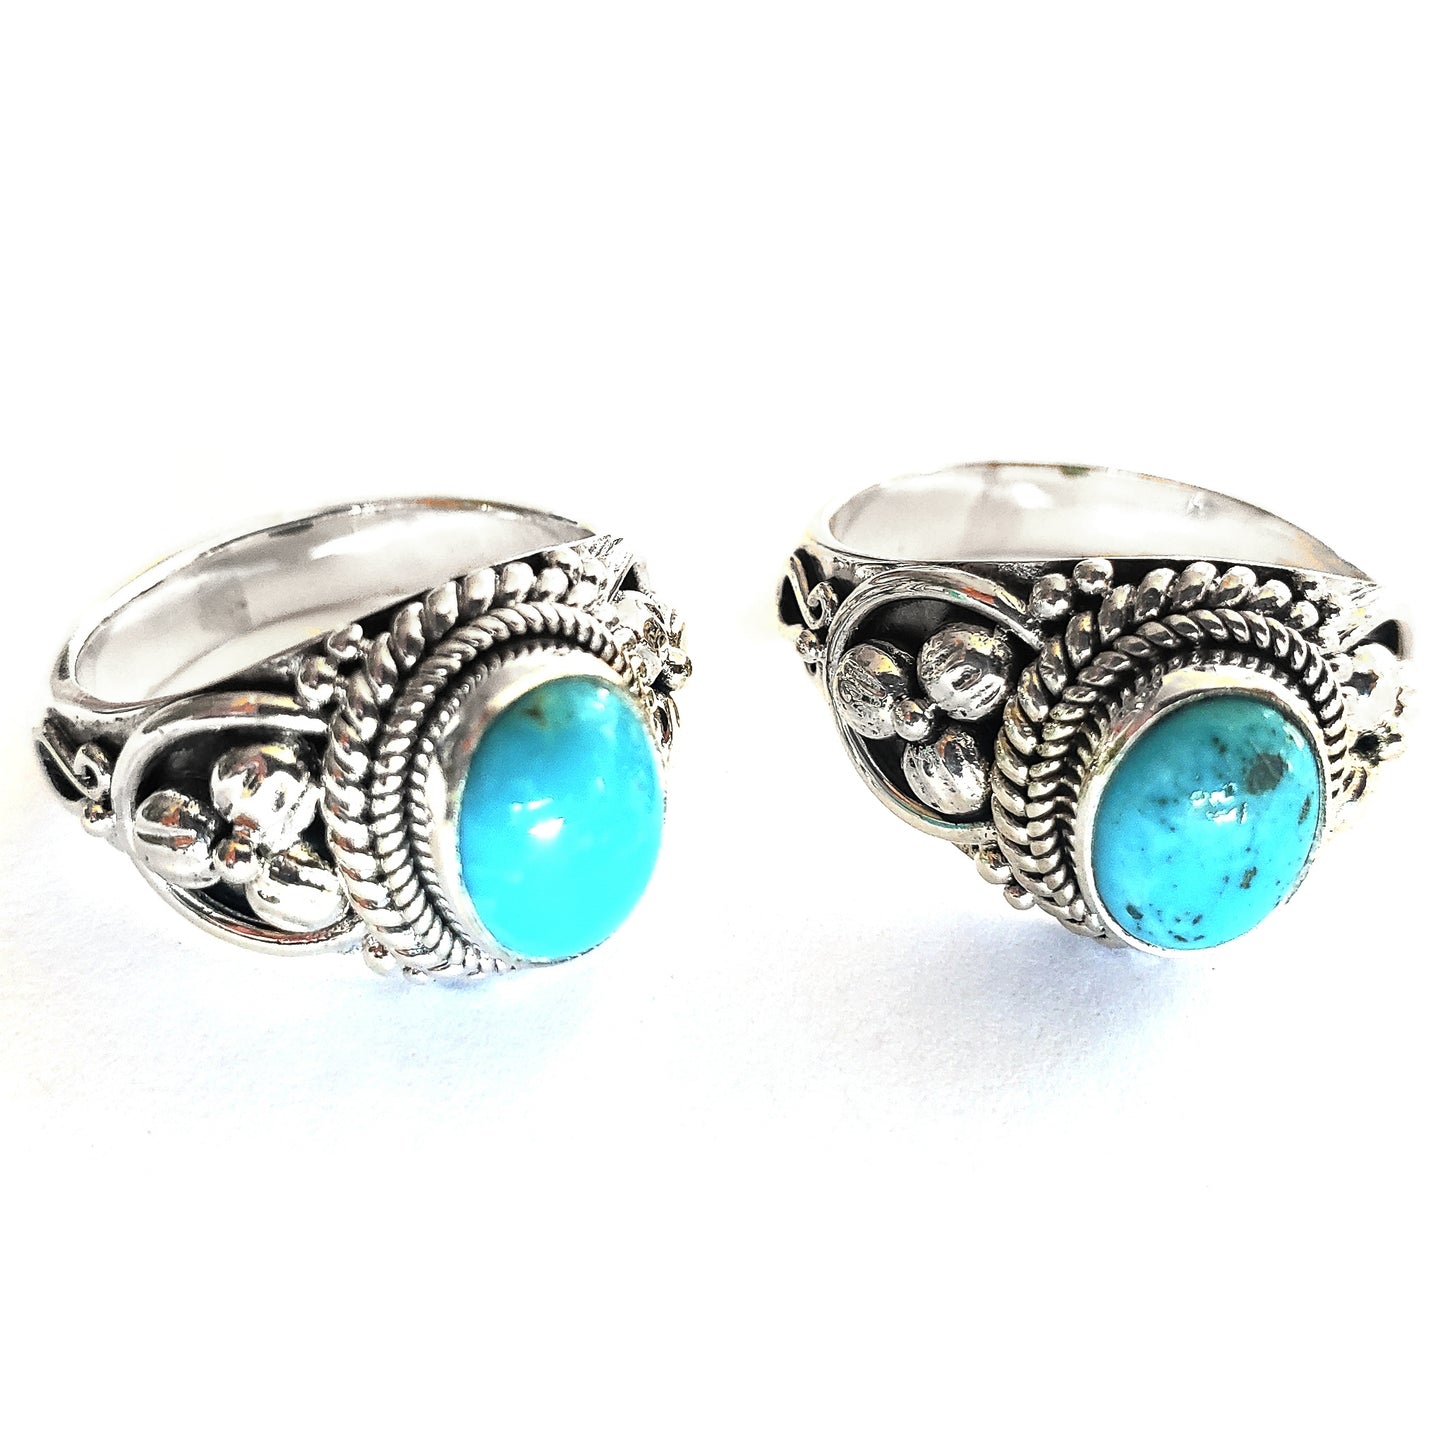 R012TQ LIMITED .925 Sterling Silver Ring with Genuine Turquoise